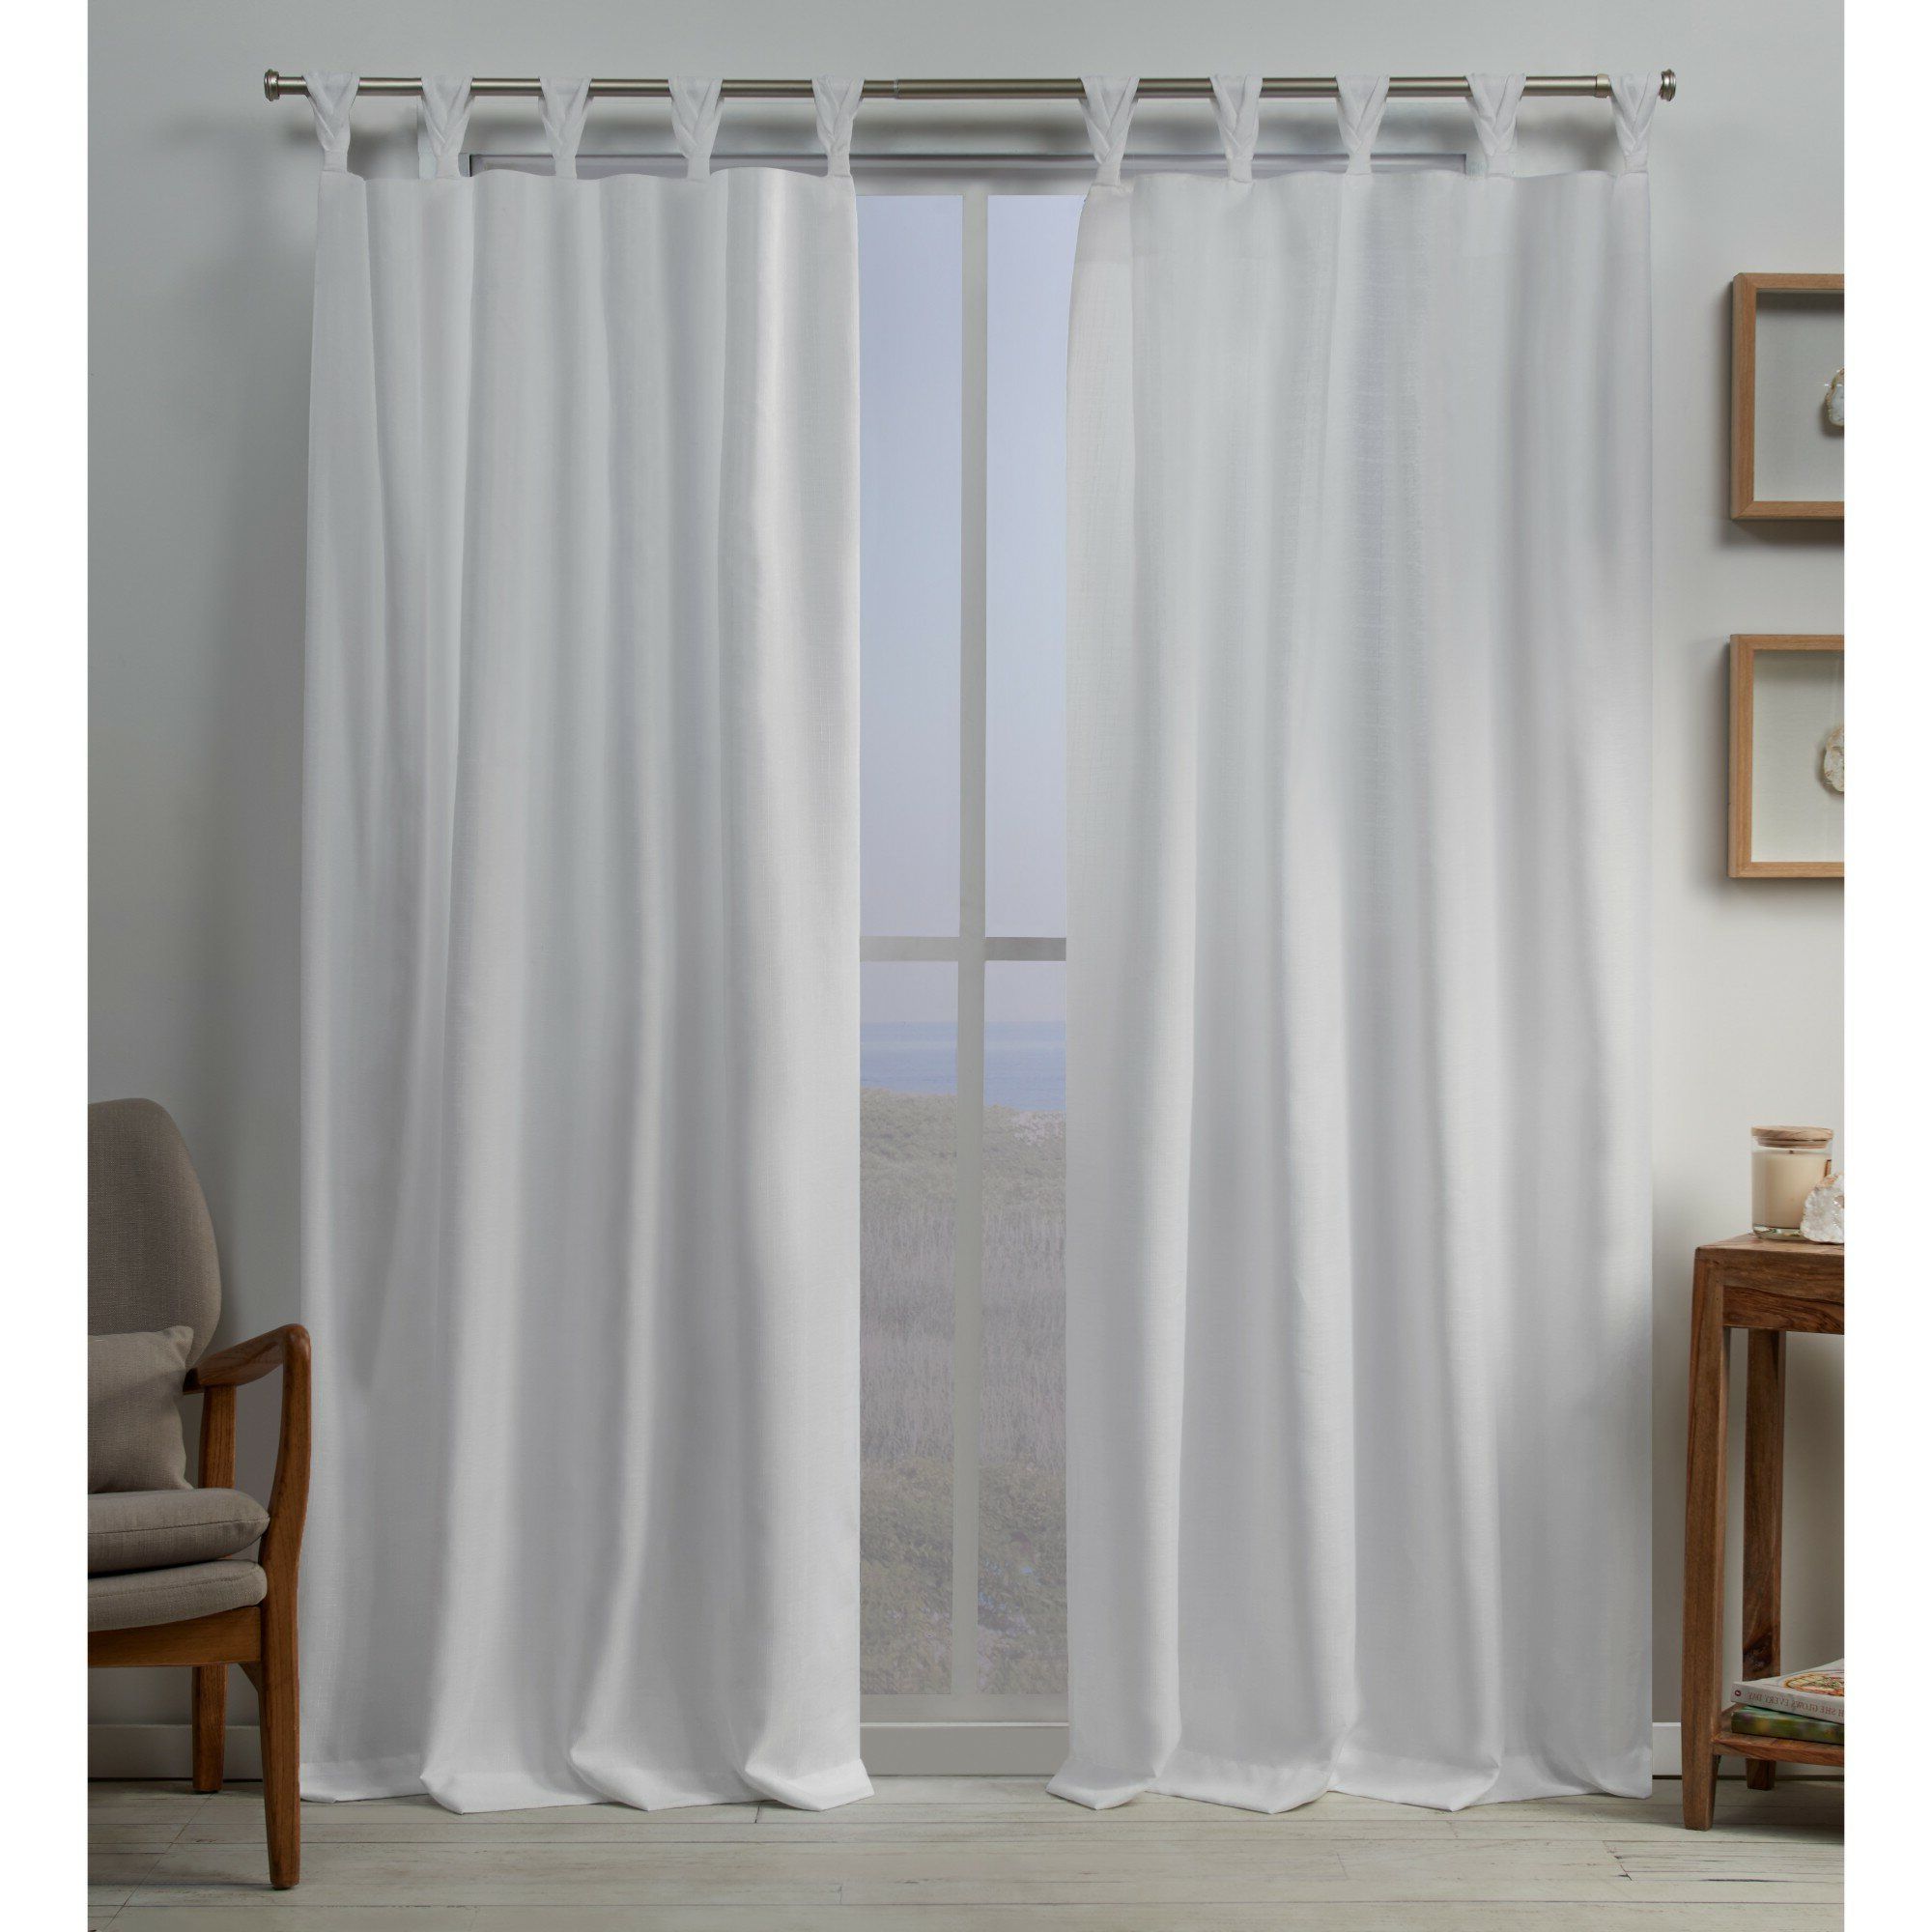 Heil Solid Color Room Darkening Tab Top Curtains Inside Fashionable Knotted Tab Top Window Curtain Panel Pairs (View 14 of 20)